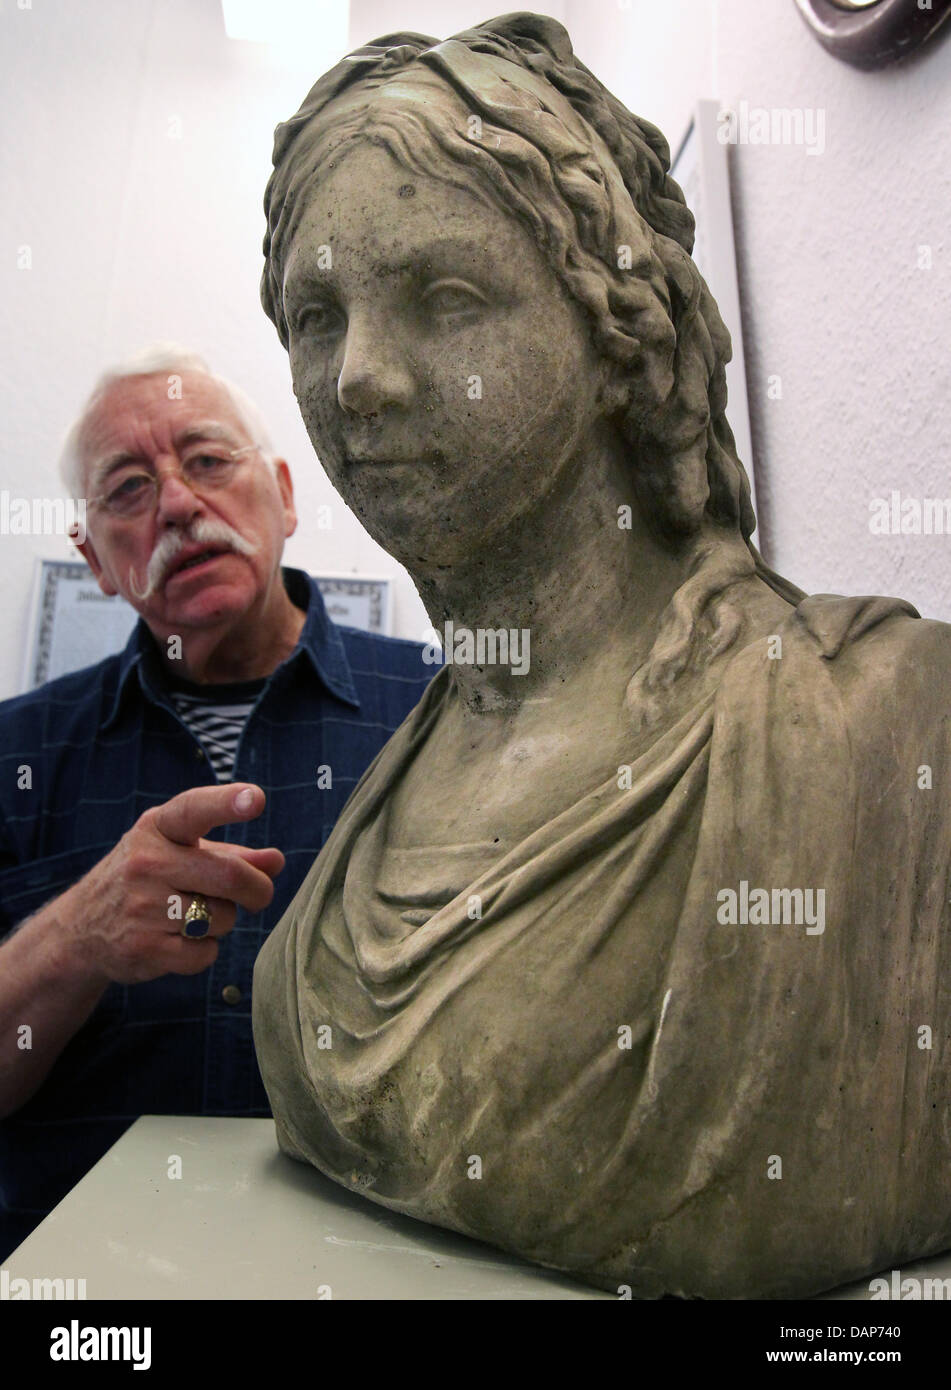 Exhibition organizer and director of the Luisen Memorial Hohenzieritz, Hans Joachem Engel, explains a bust of Frederica of Mecklenburg-Strelitz, later Queen of Hanover, at the municipal museum in Neustrelitz, Germany, 28 July 2011. The piece is part of a new exhibition 'Three Weddings of the English royal house', in which the close relationship of the grand duchy of Mecklenburg-Str Stock Photo